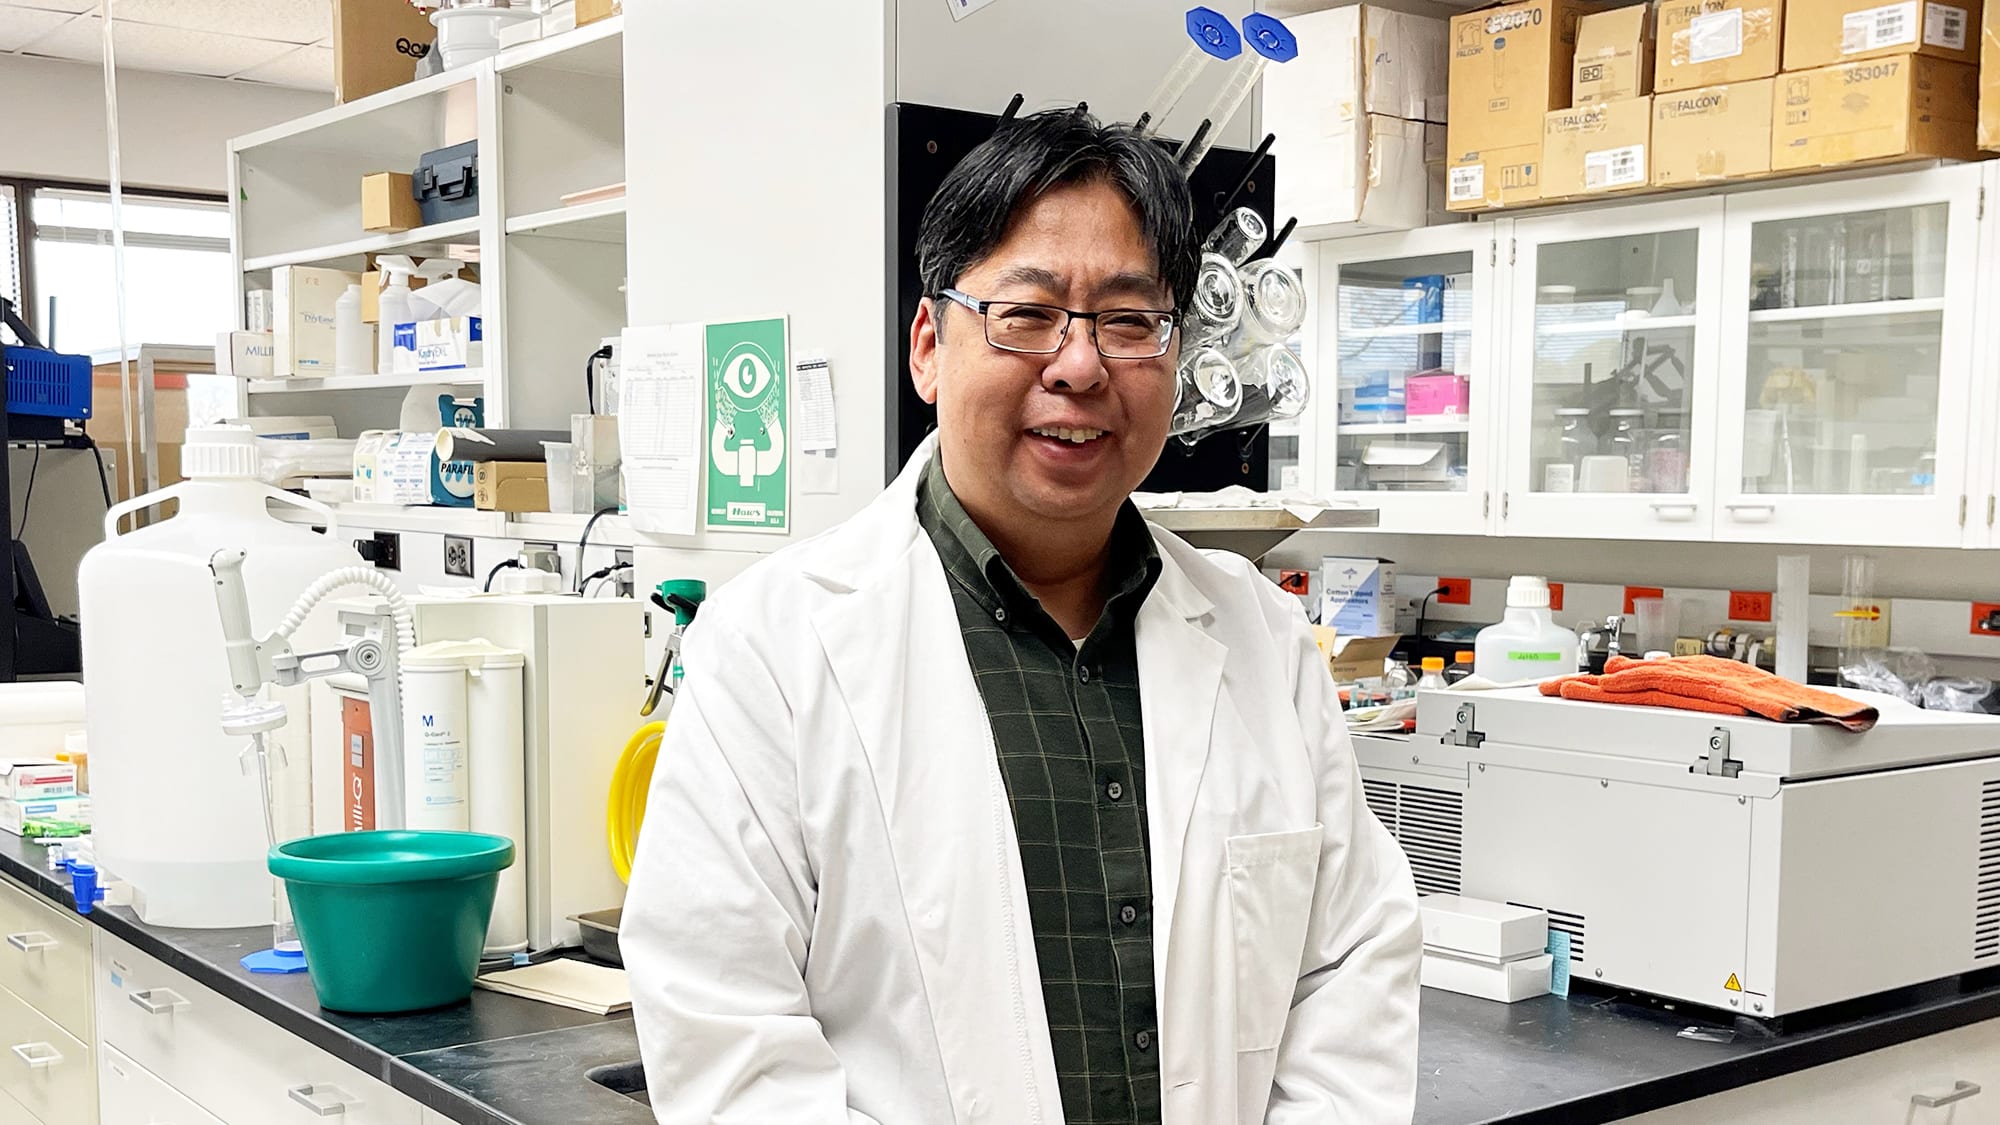 UAMS research scientist Fang Zheng, Ph.D., recently received from The National Institutes of Health a $1.8 million grant to, to continue research that could lead to new treatments for epilepsy and other neurological diseases.